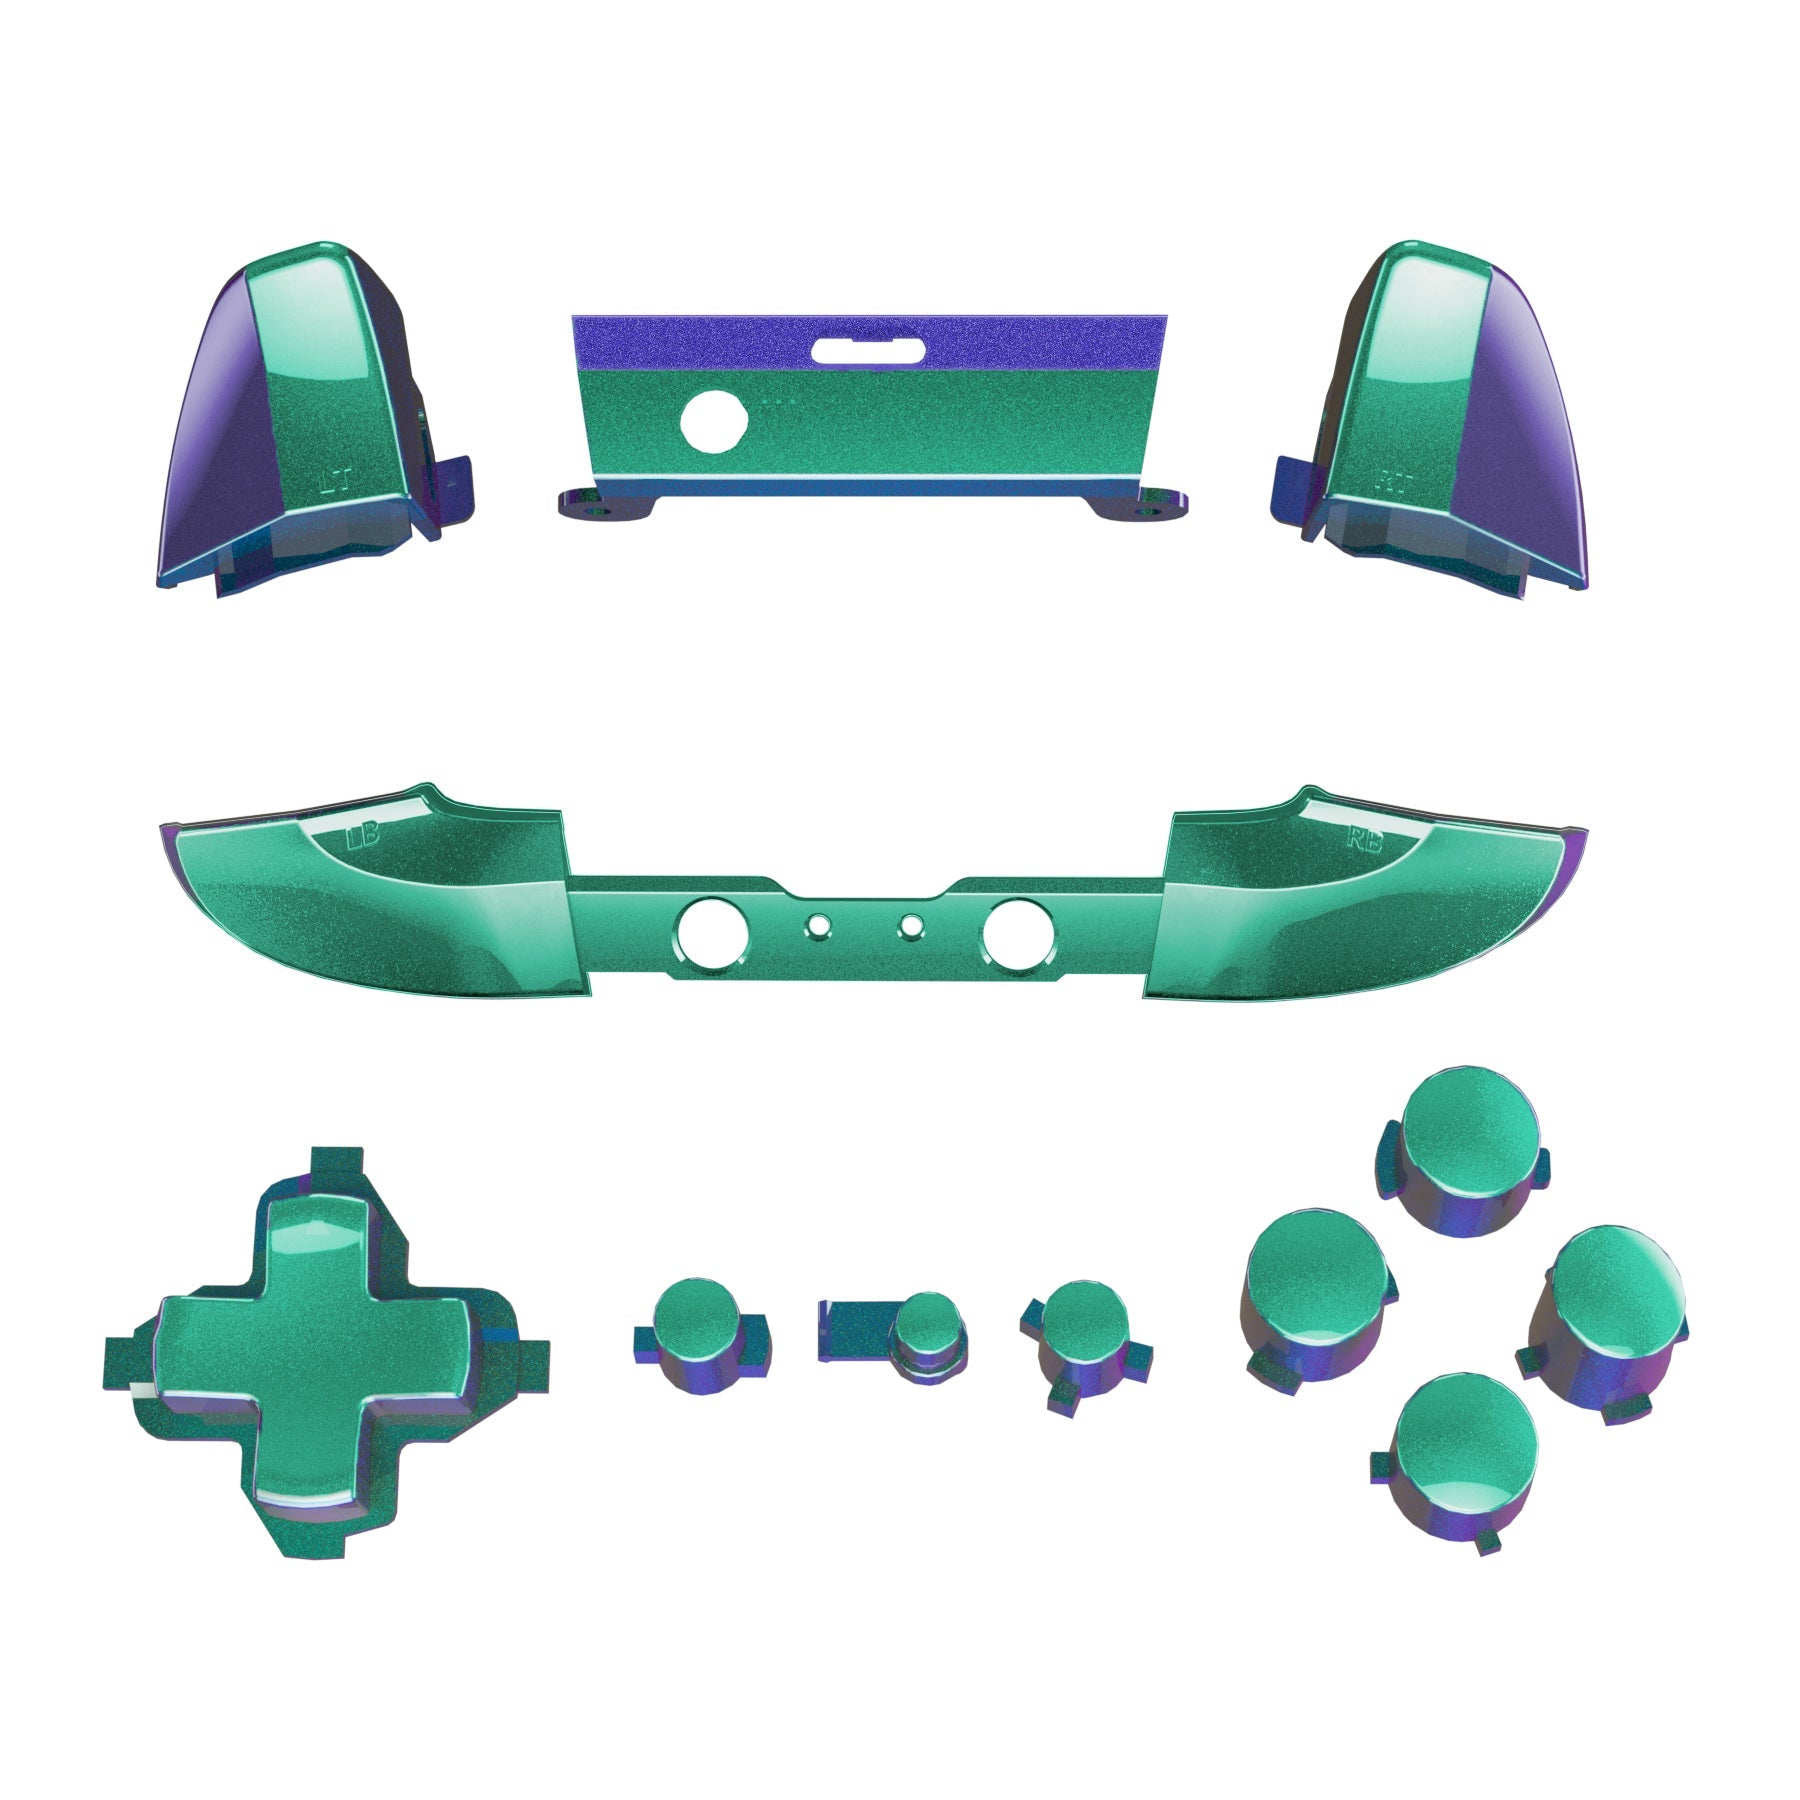 eXtremeRate Retail LB RB LT RT Bumpers Triggers D-Pad ABXY Start Back Sync Buttons, Chameleon Green Purple Full Set Buttons Repair Kits with Tools for Xbox One S X Controller (Model 1708) - SXOJ0222